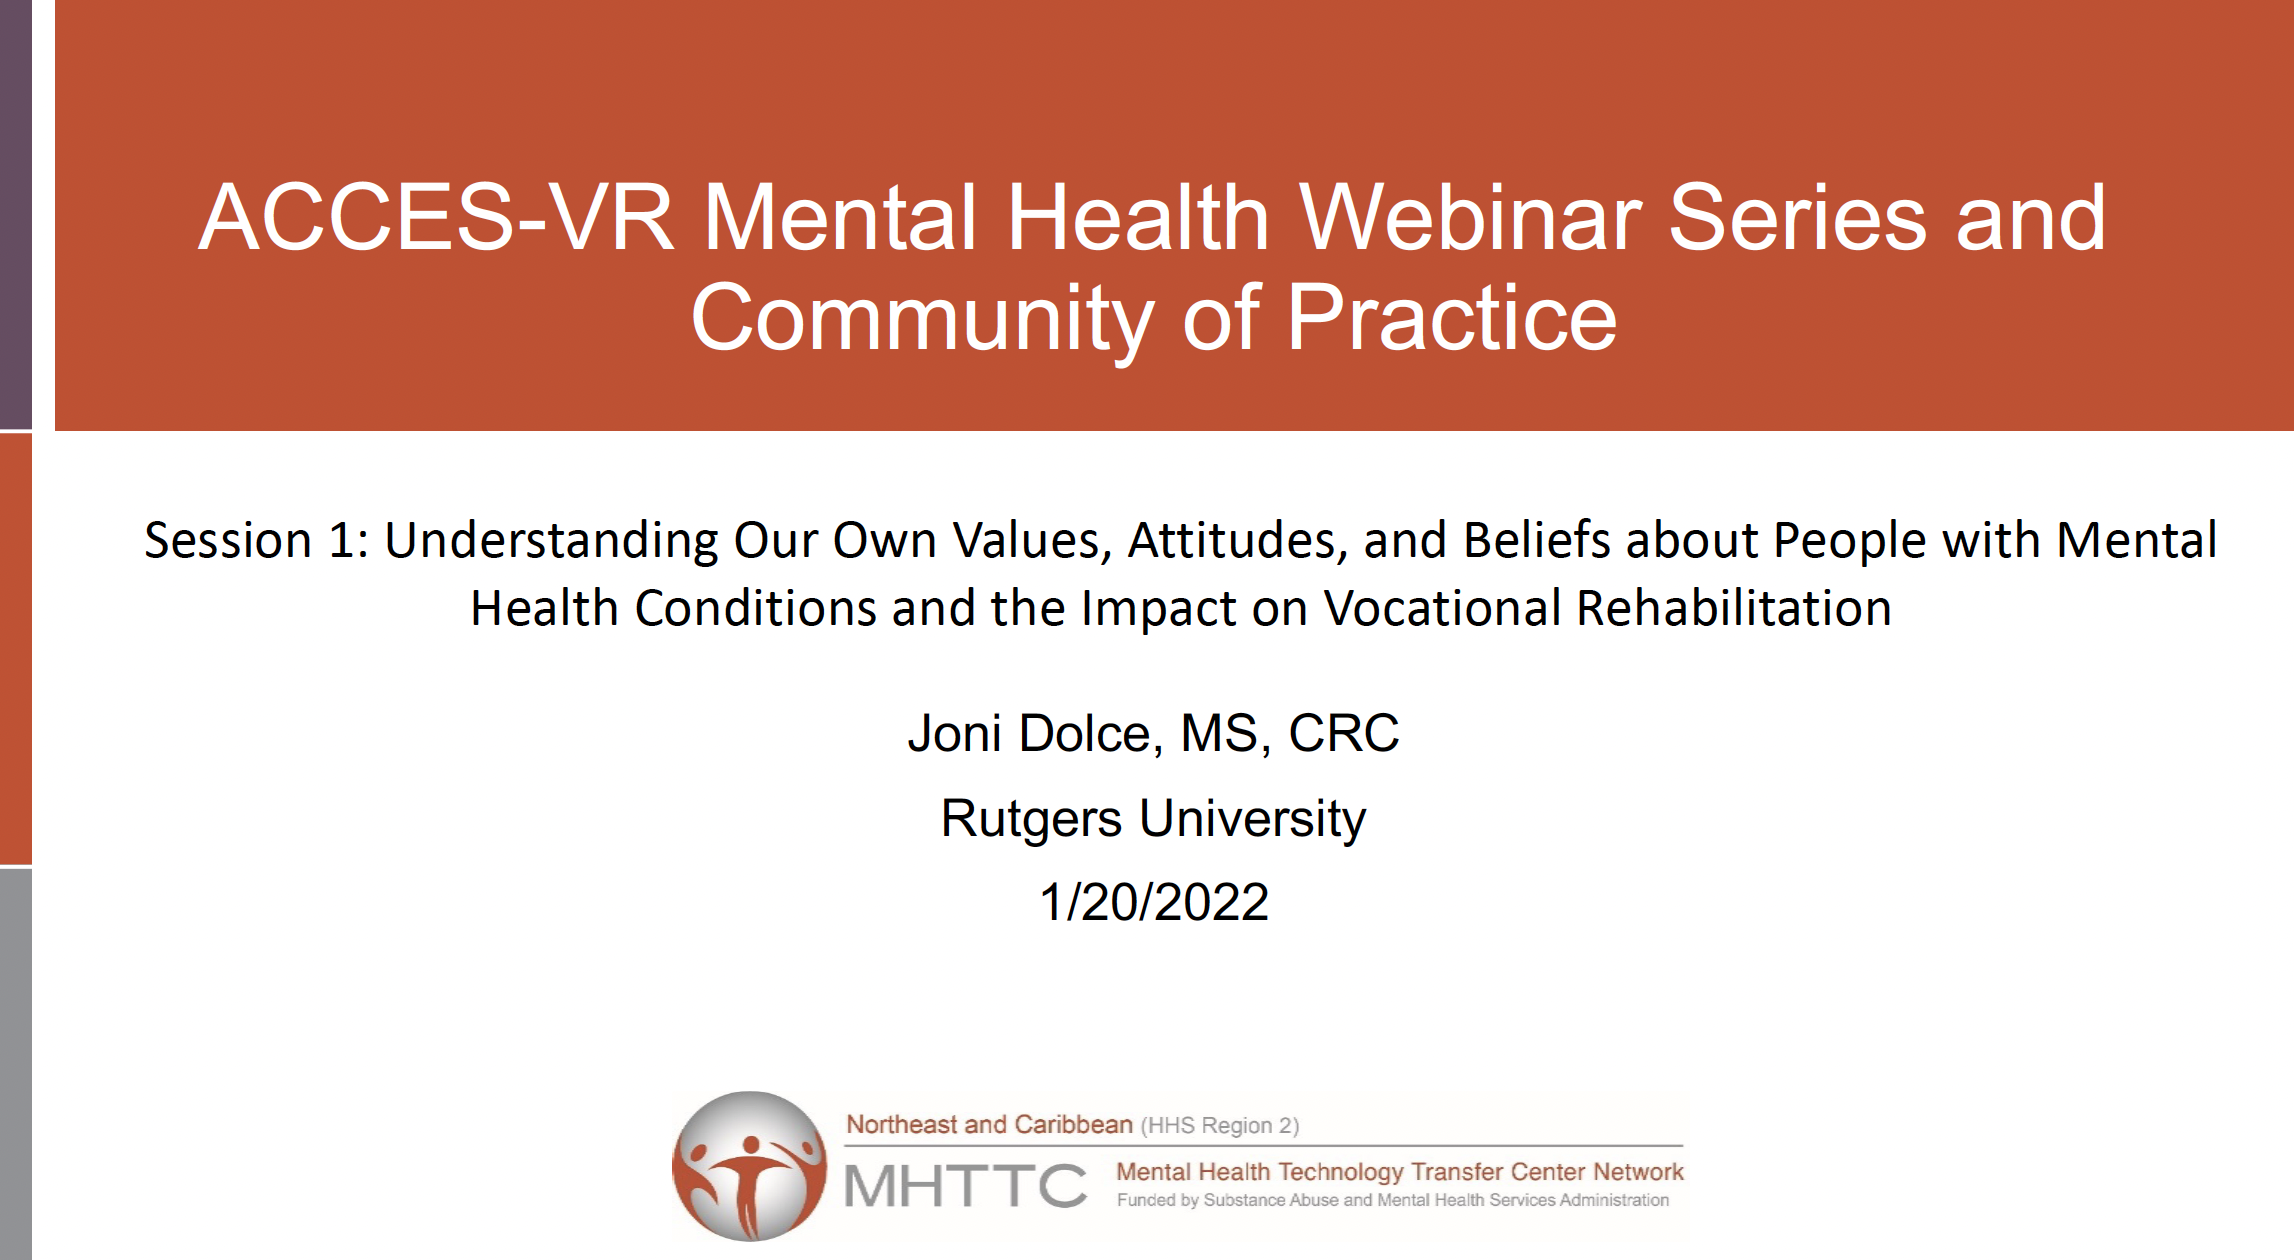 ACCES-VR Mental Health Webinar Series and Community of Practice Session 1: Understanding Our Own Values, Attitudes, and Beliefs about People with Mental Health Conditions and the Impact on Vocational Rehabilitation